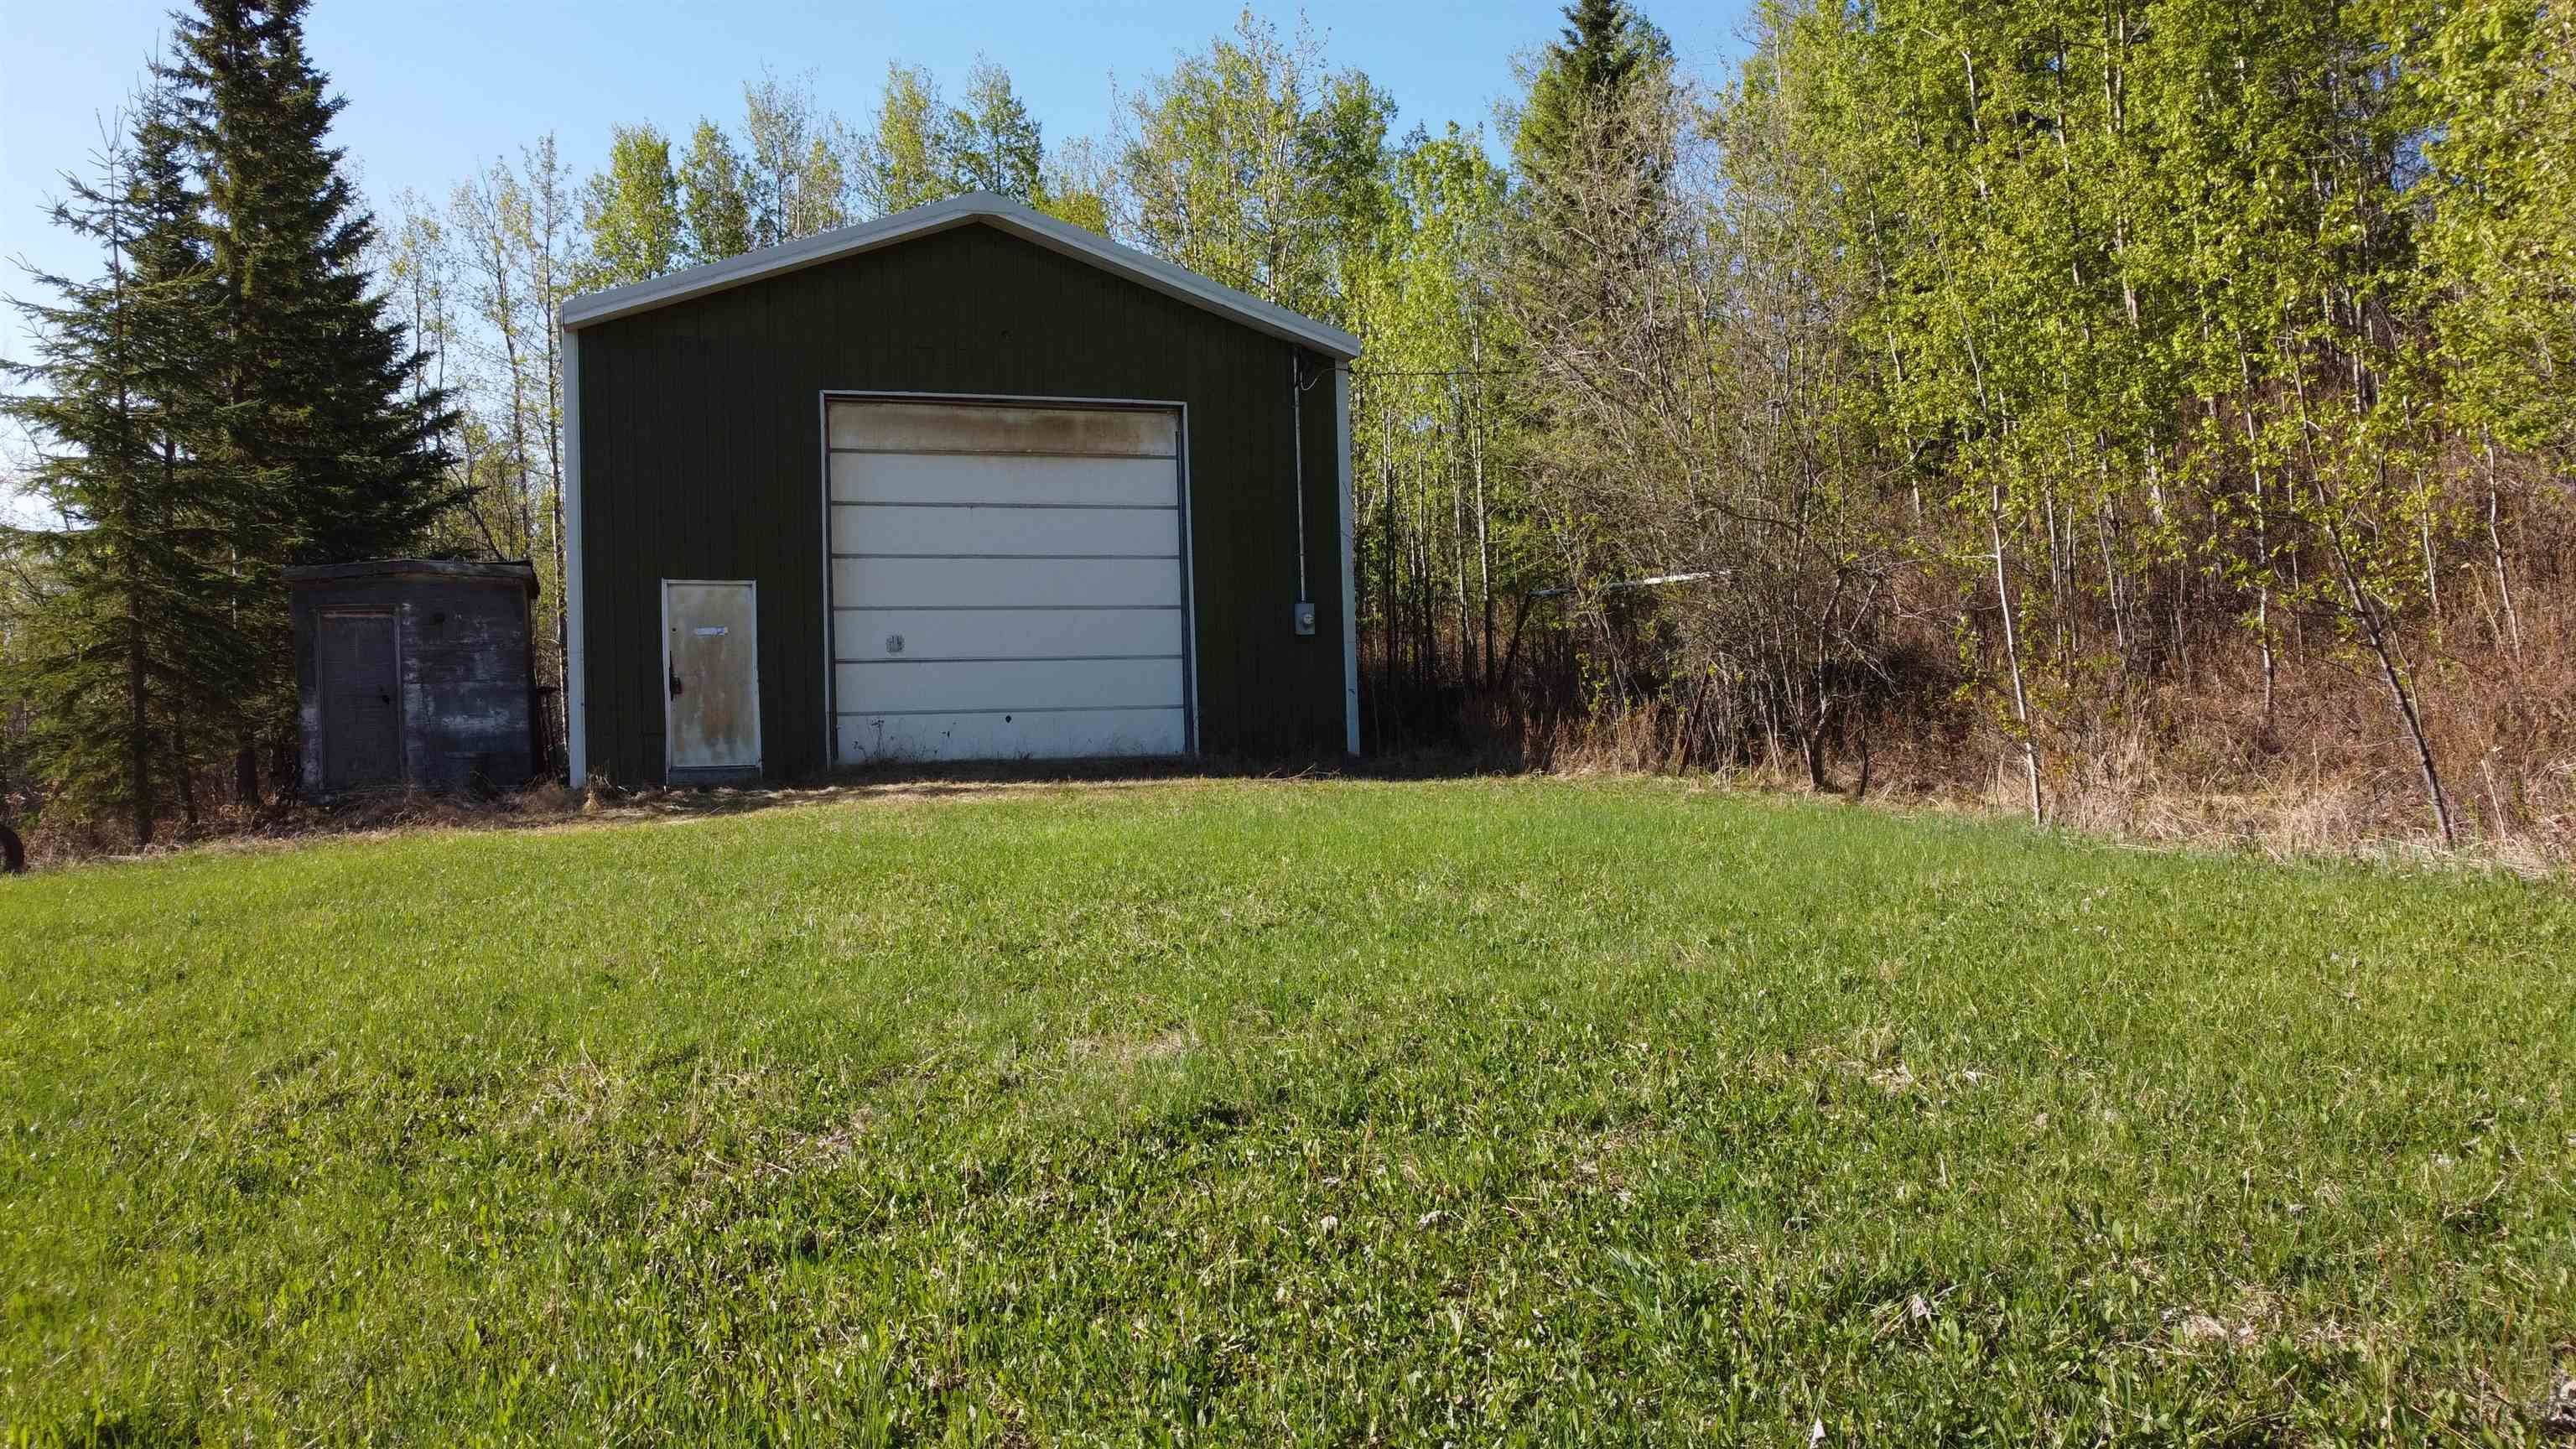 Shop has Power, Concrete Floor, Drain, N/G Heat, 14' Door, Gravel Driveway and Gate Posts with Cable Lock